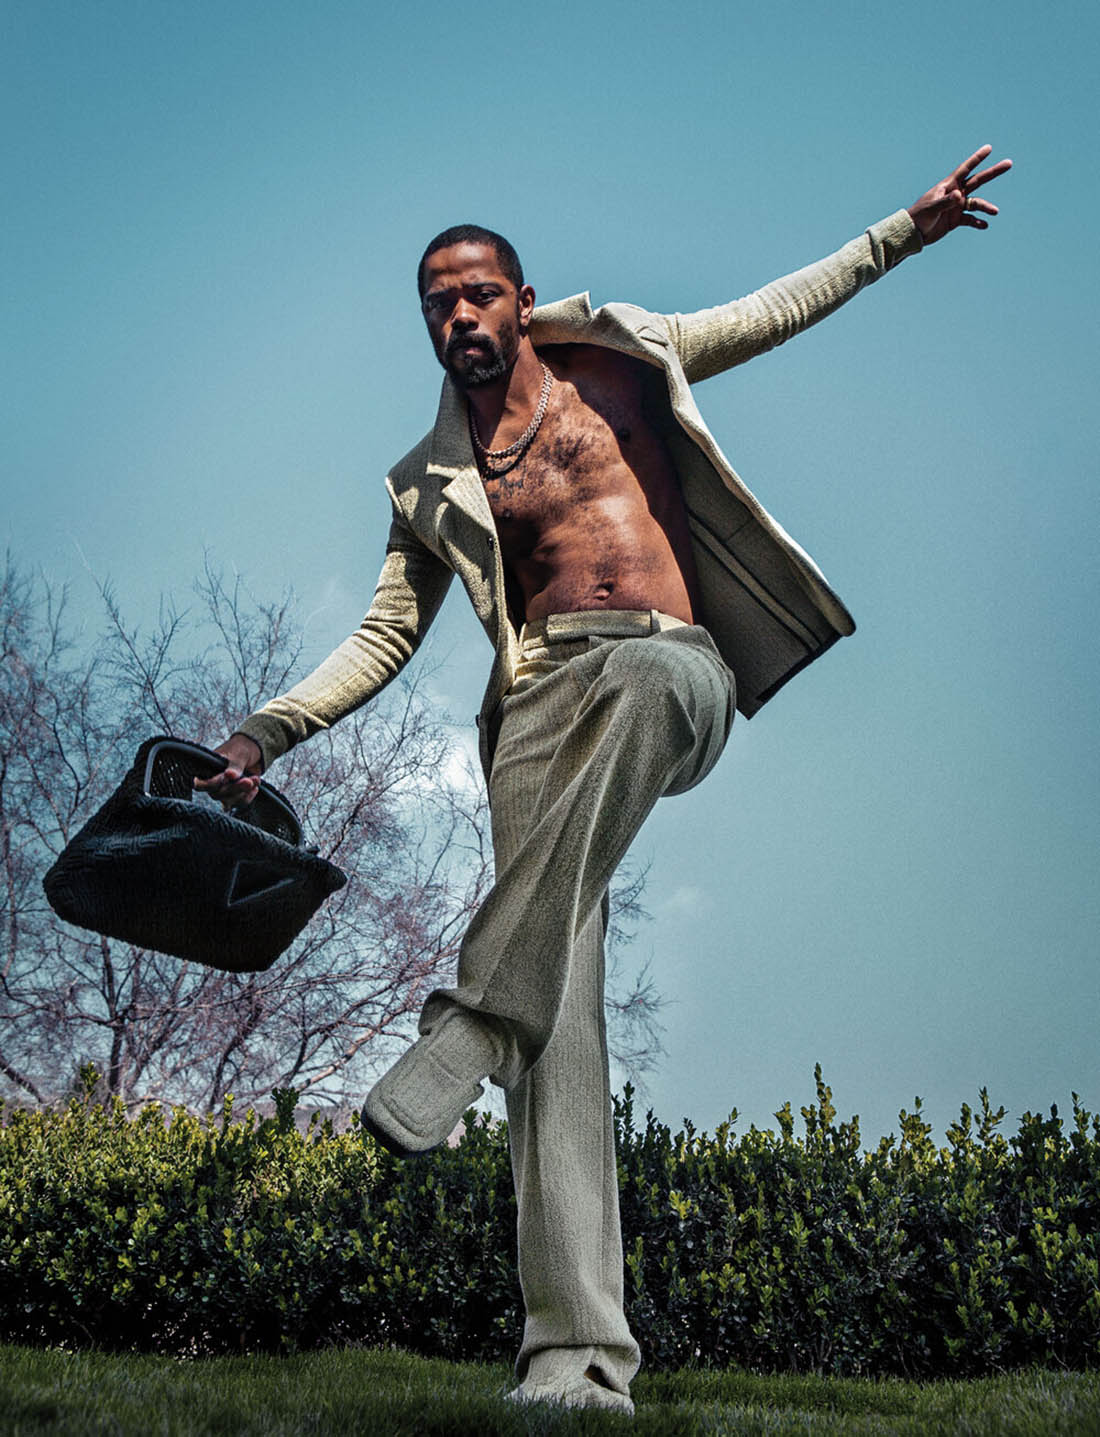 Lakeith Stanfield covers Flaunt Magazine Issue 174 by Andi Elloway